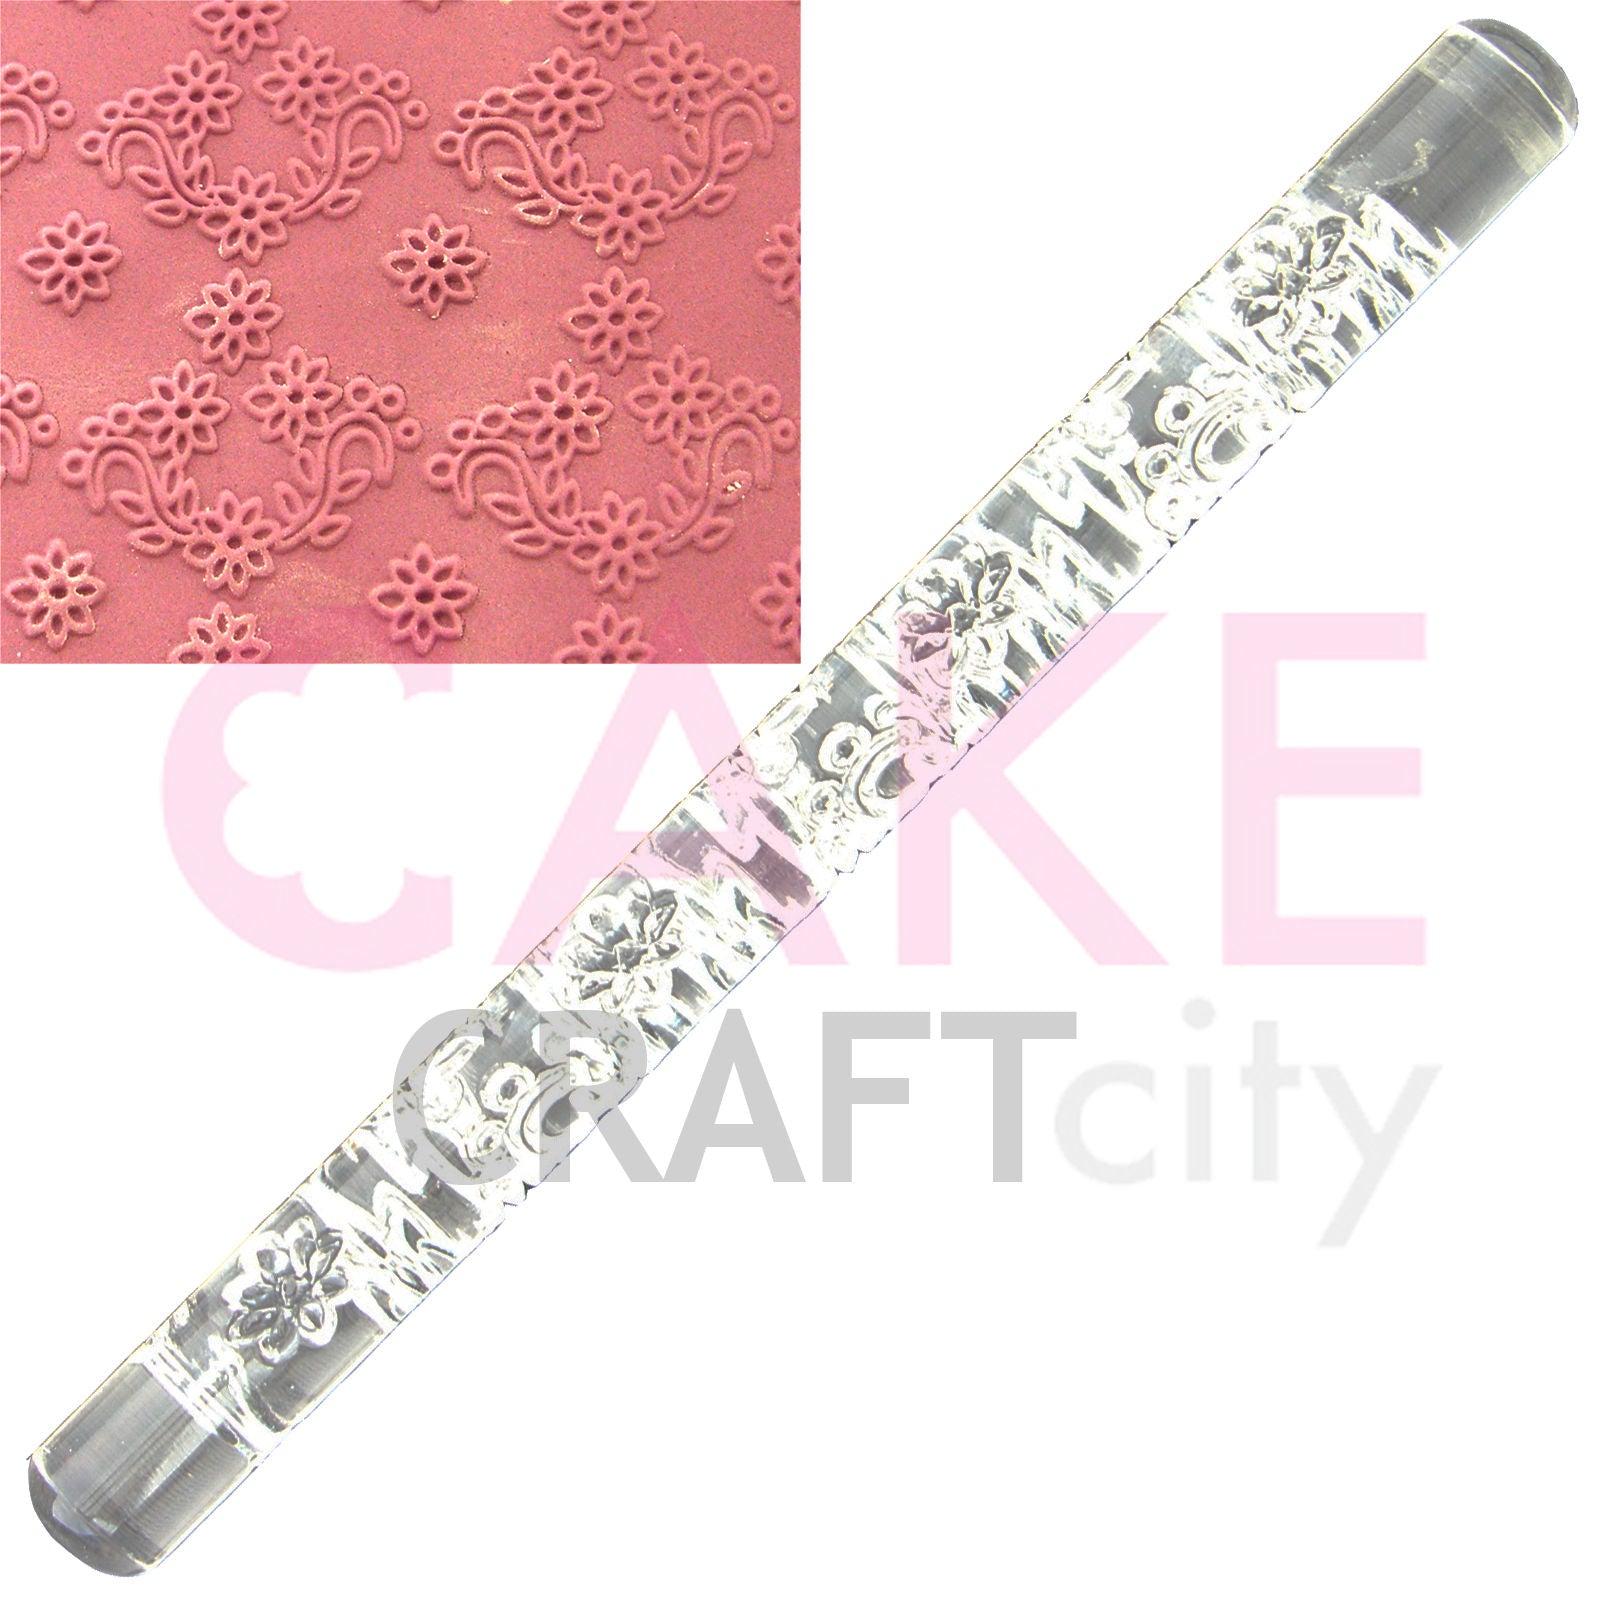 Daisy Garland effect Texture Embossing Acrylic Rolling Pin cake decorating